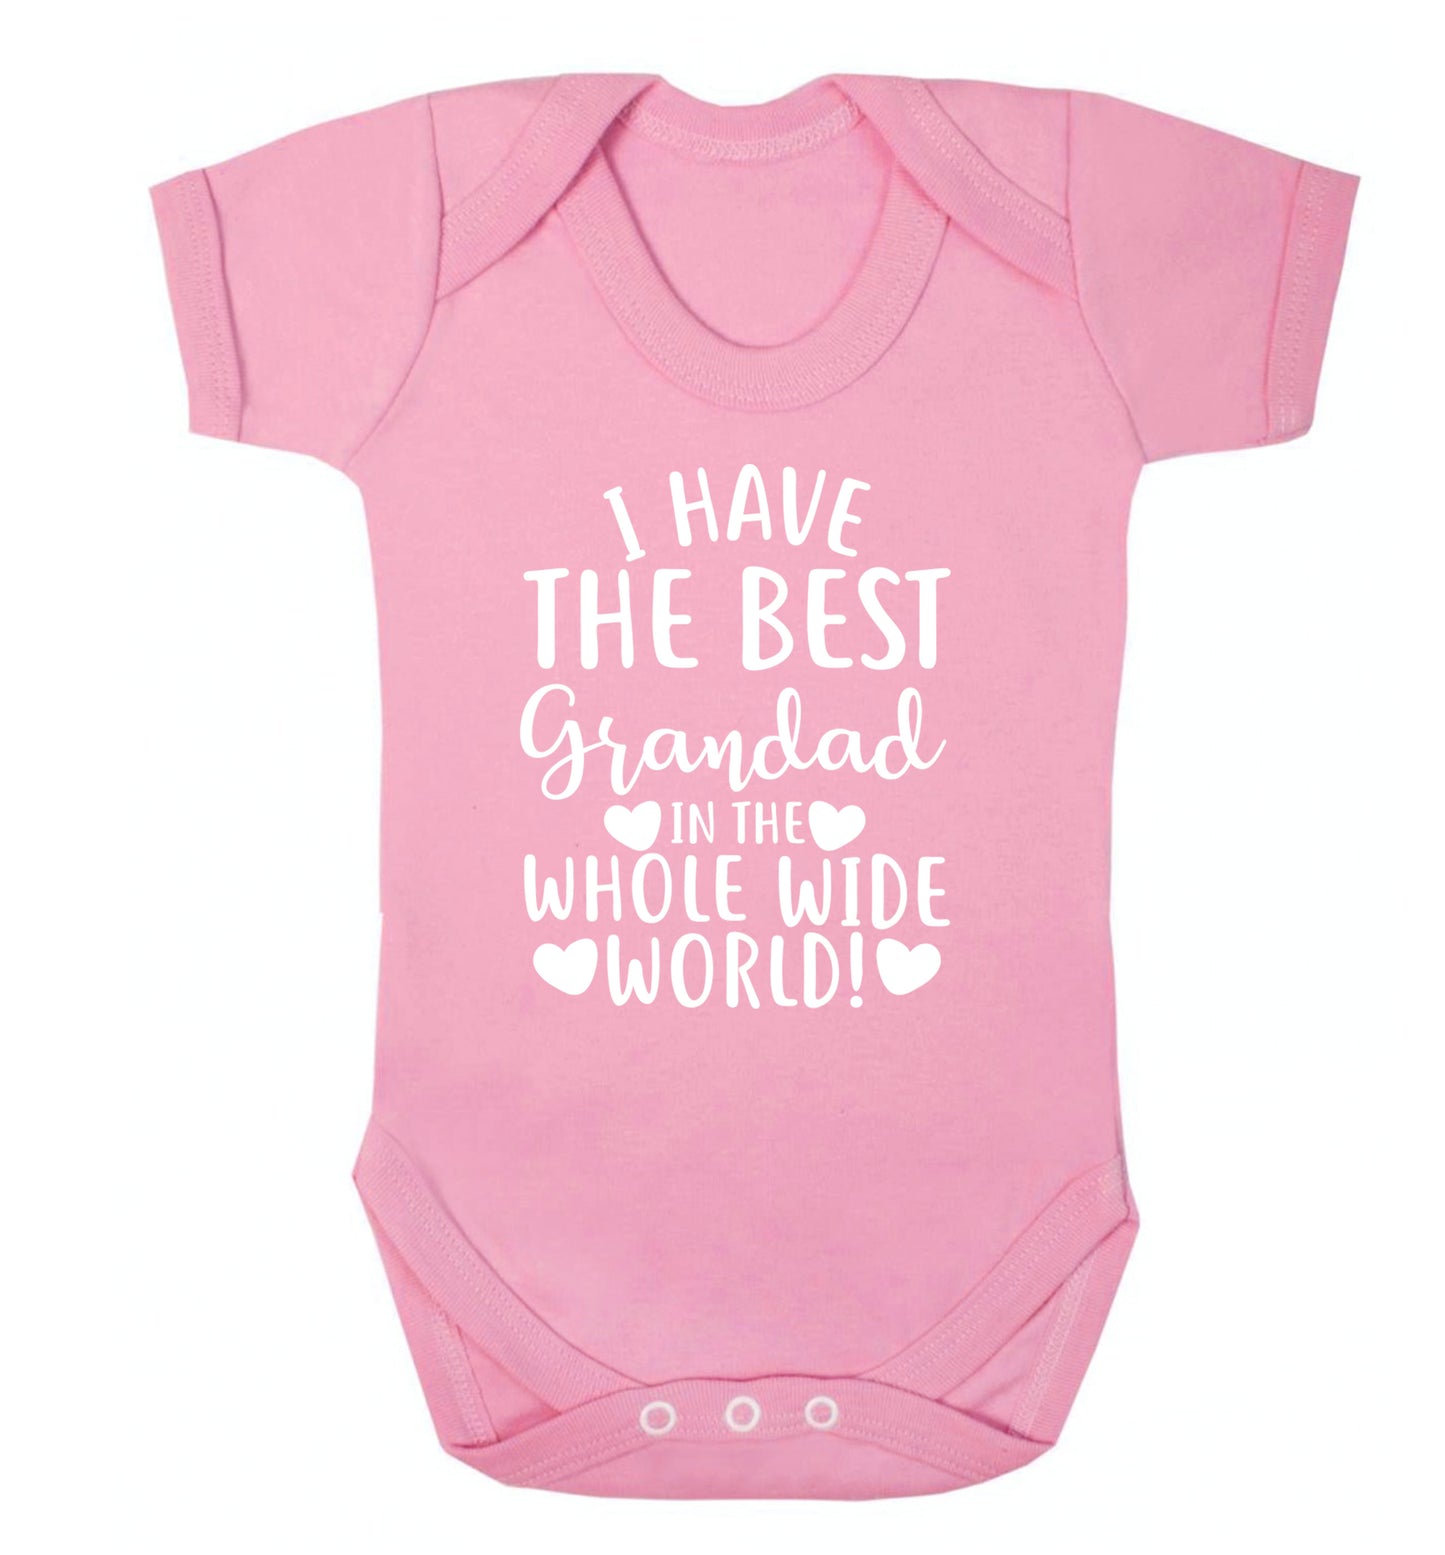 I have the best grandad in the whole wide world! Baby Vest pale pink 18-24 months